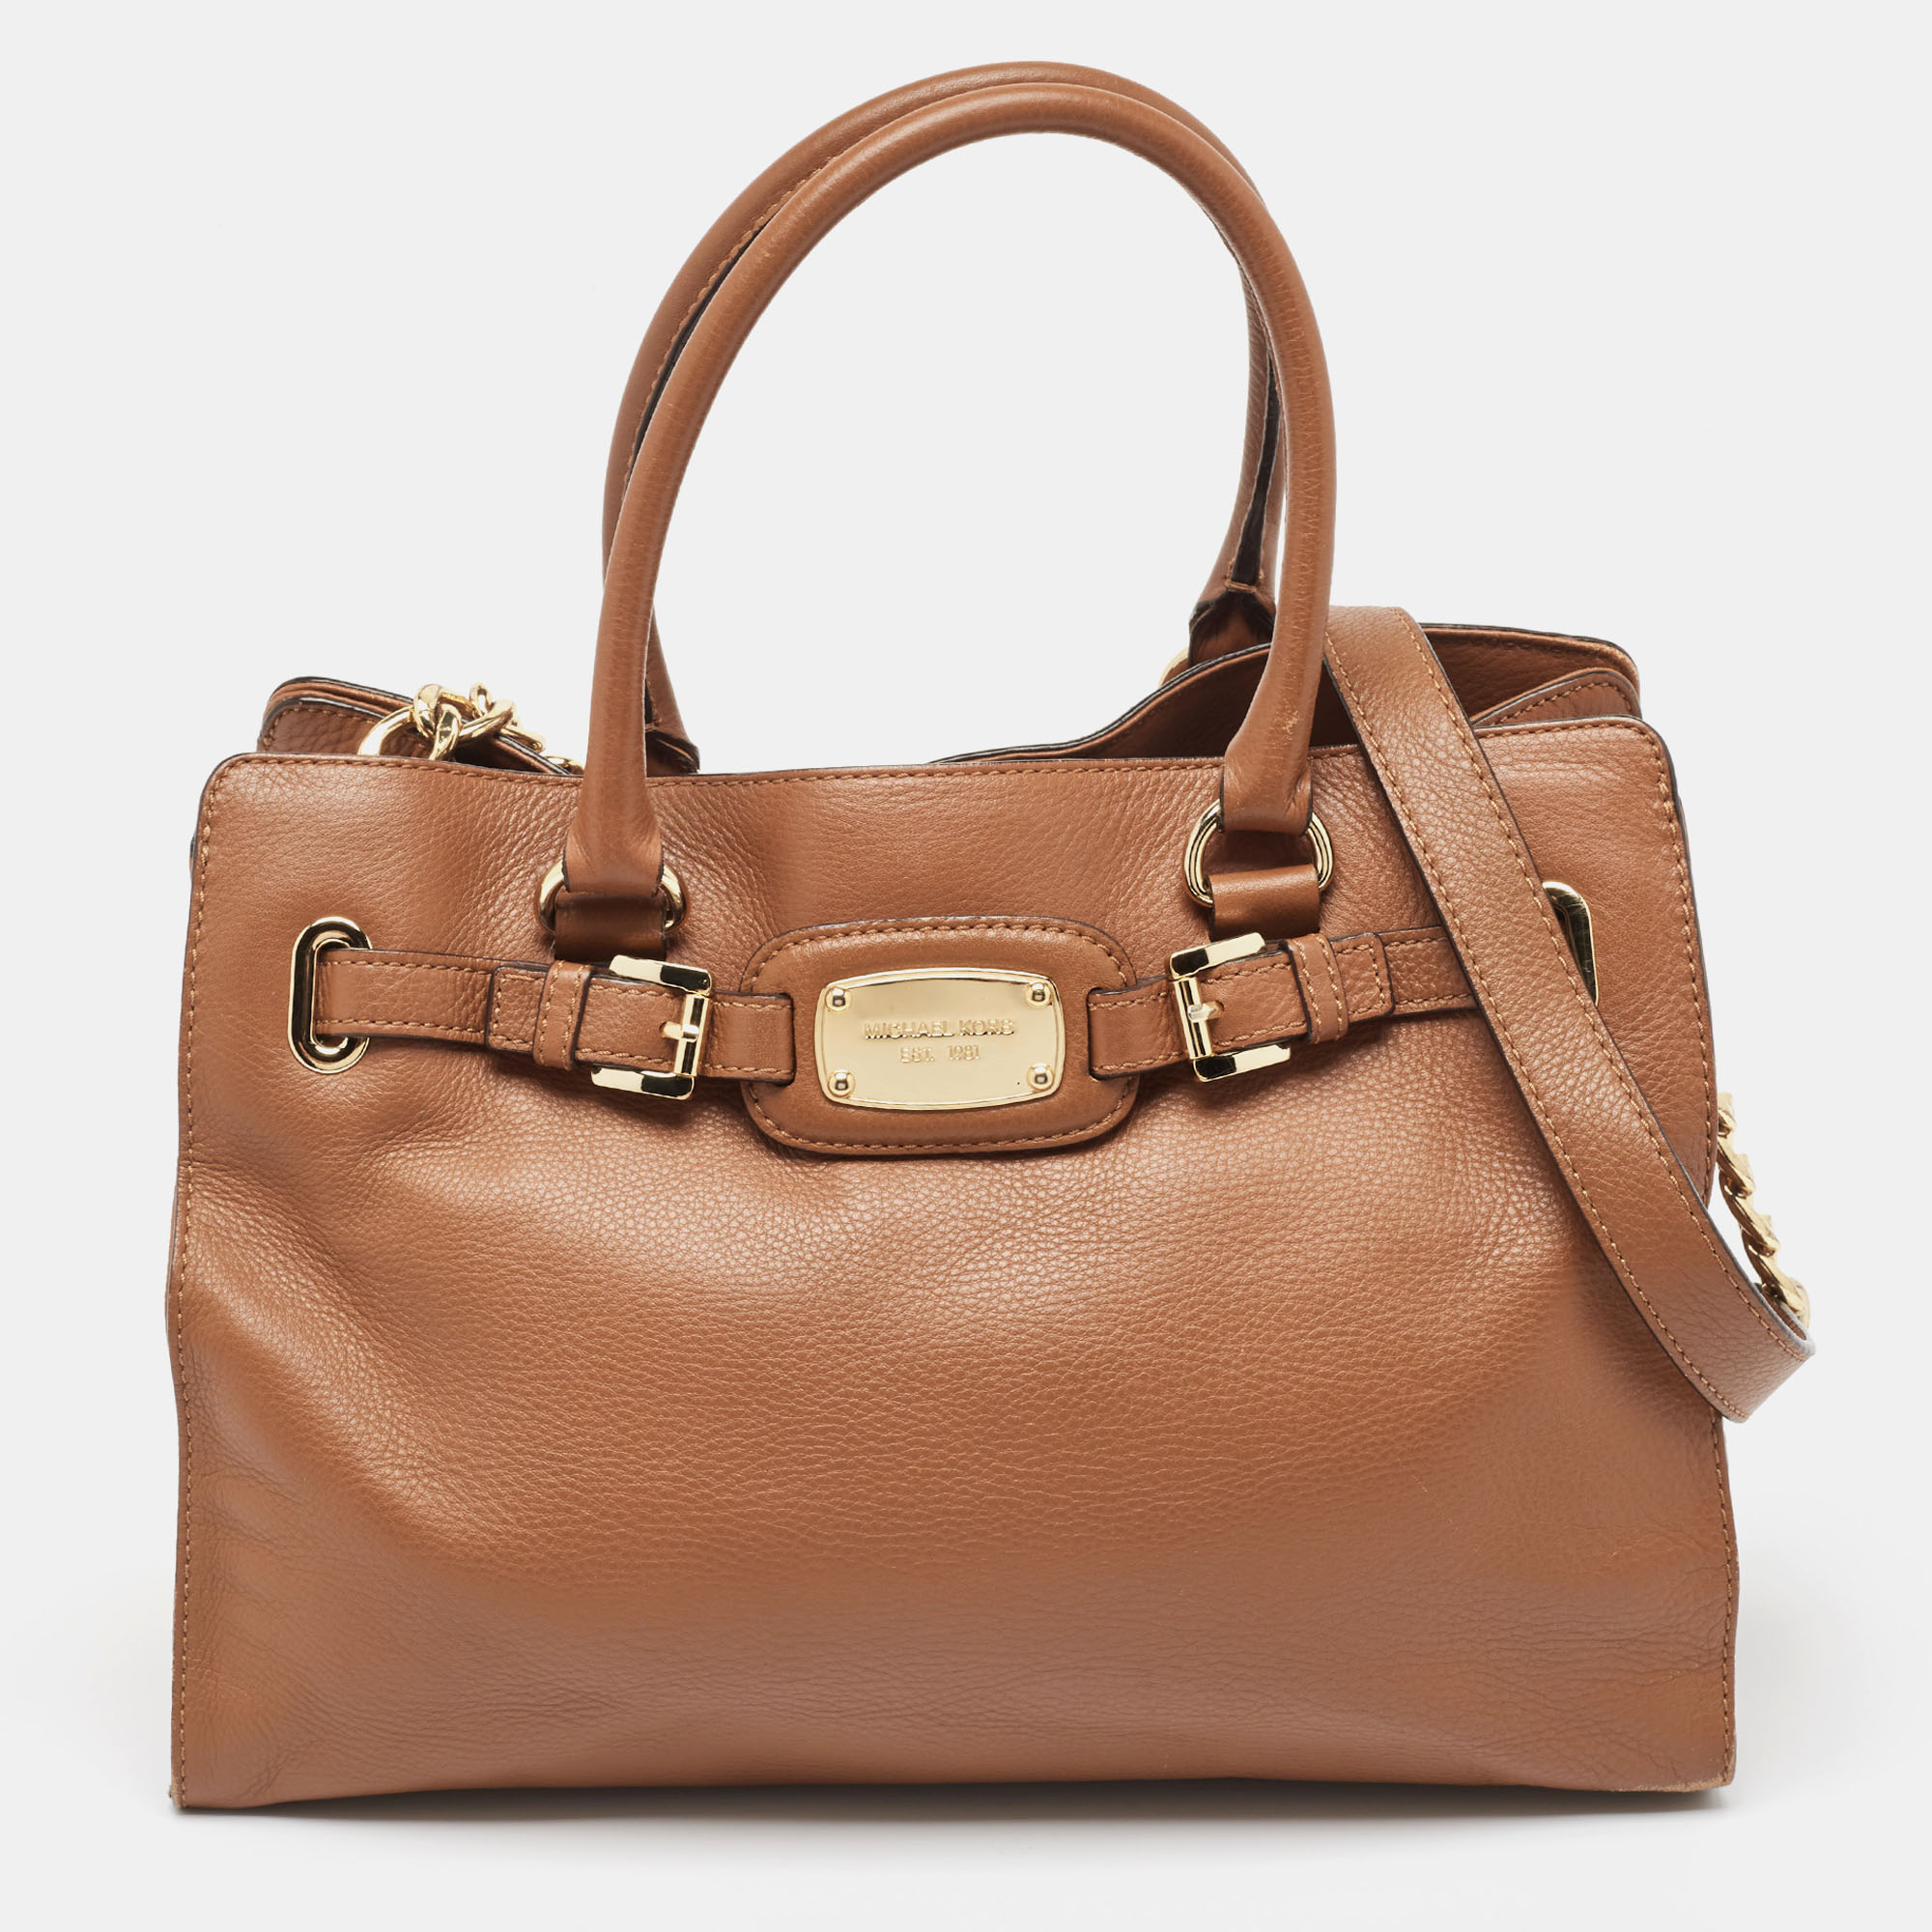 Pre-owned Michael Kors Brown Leather Hamilton Tote